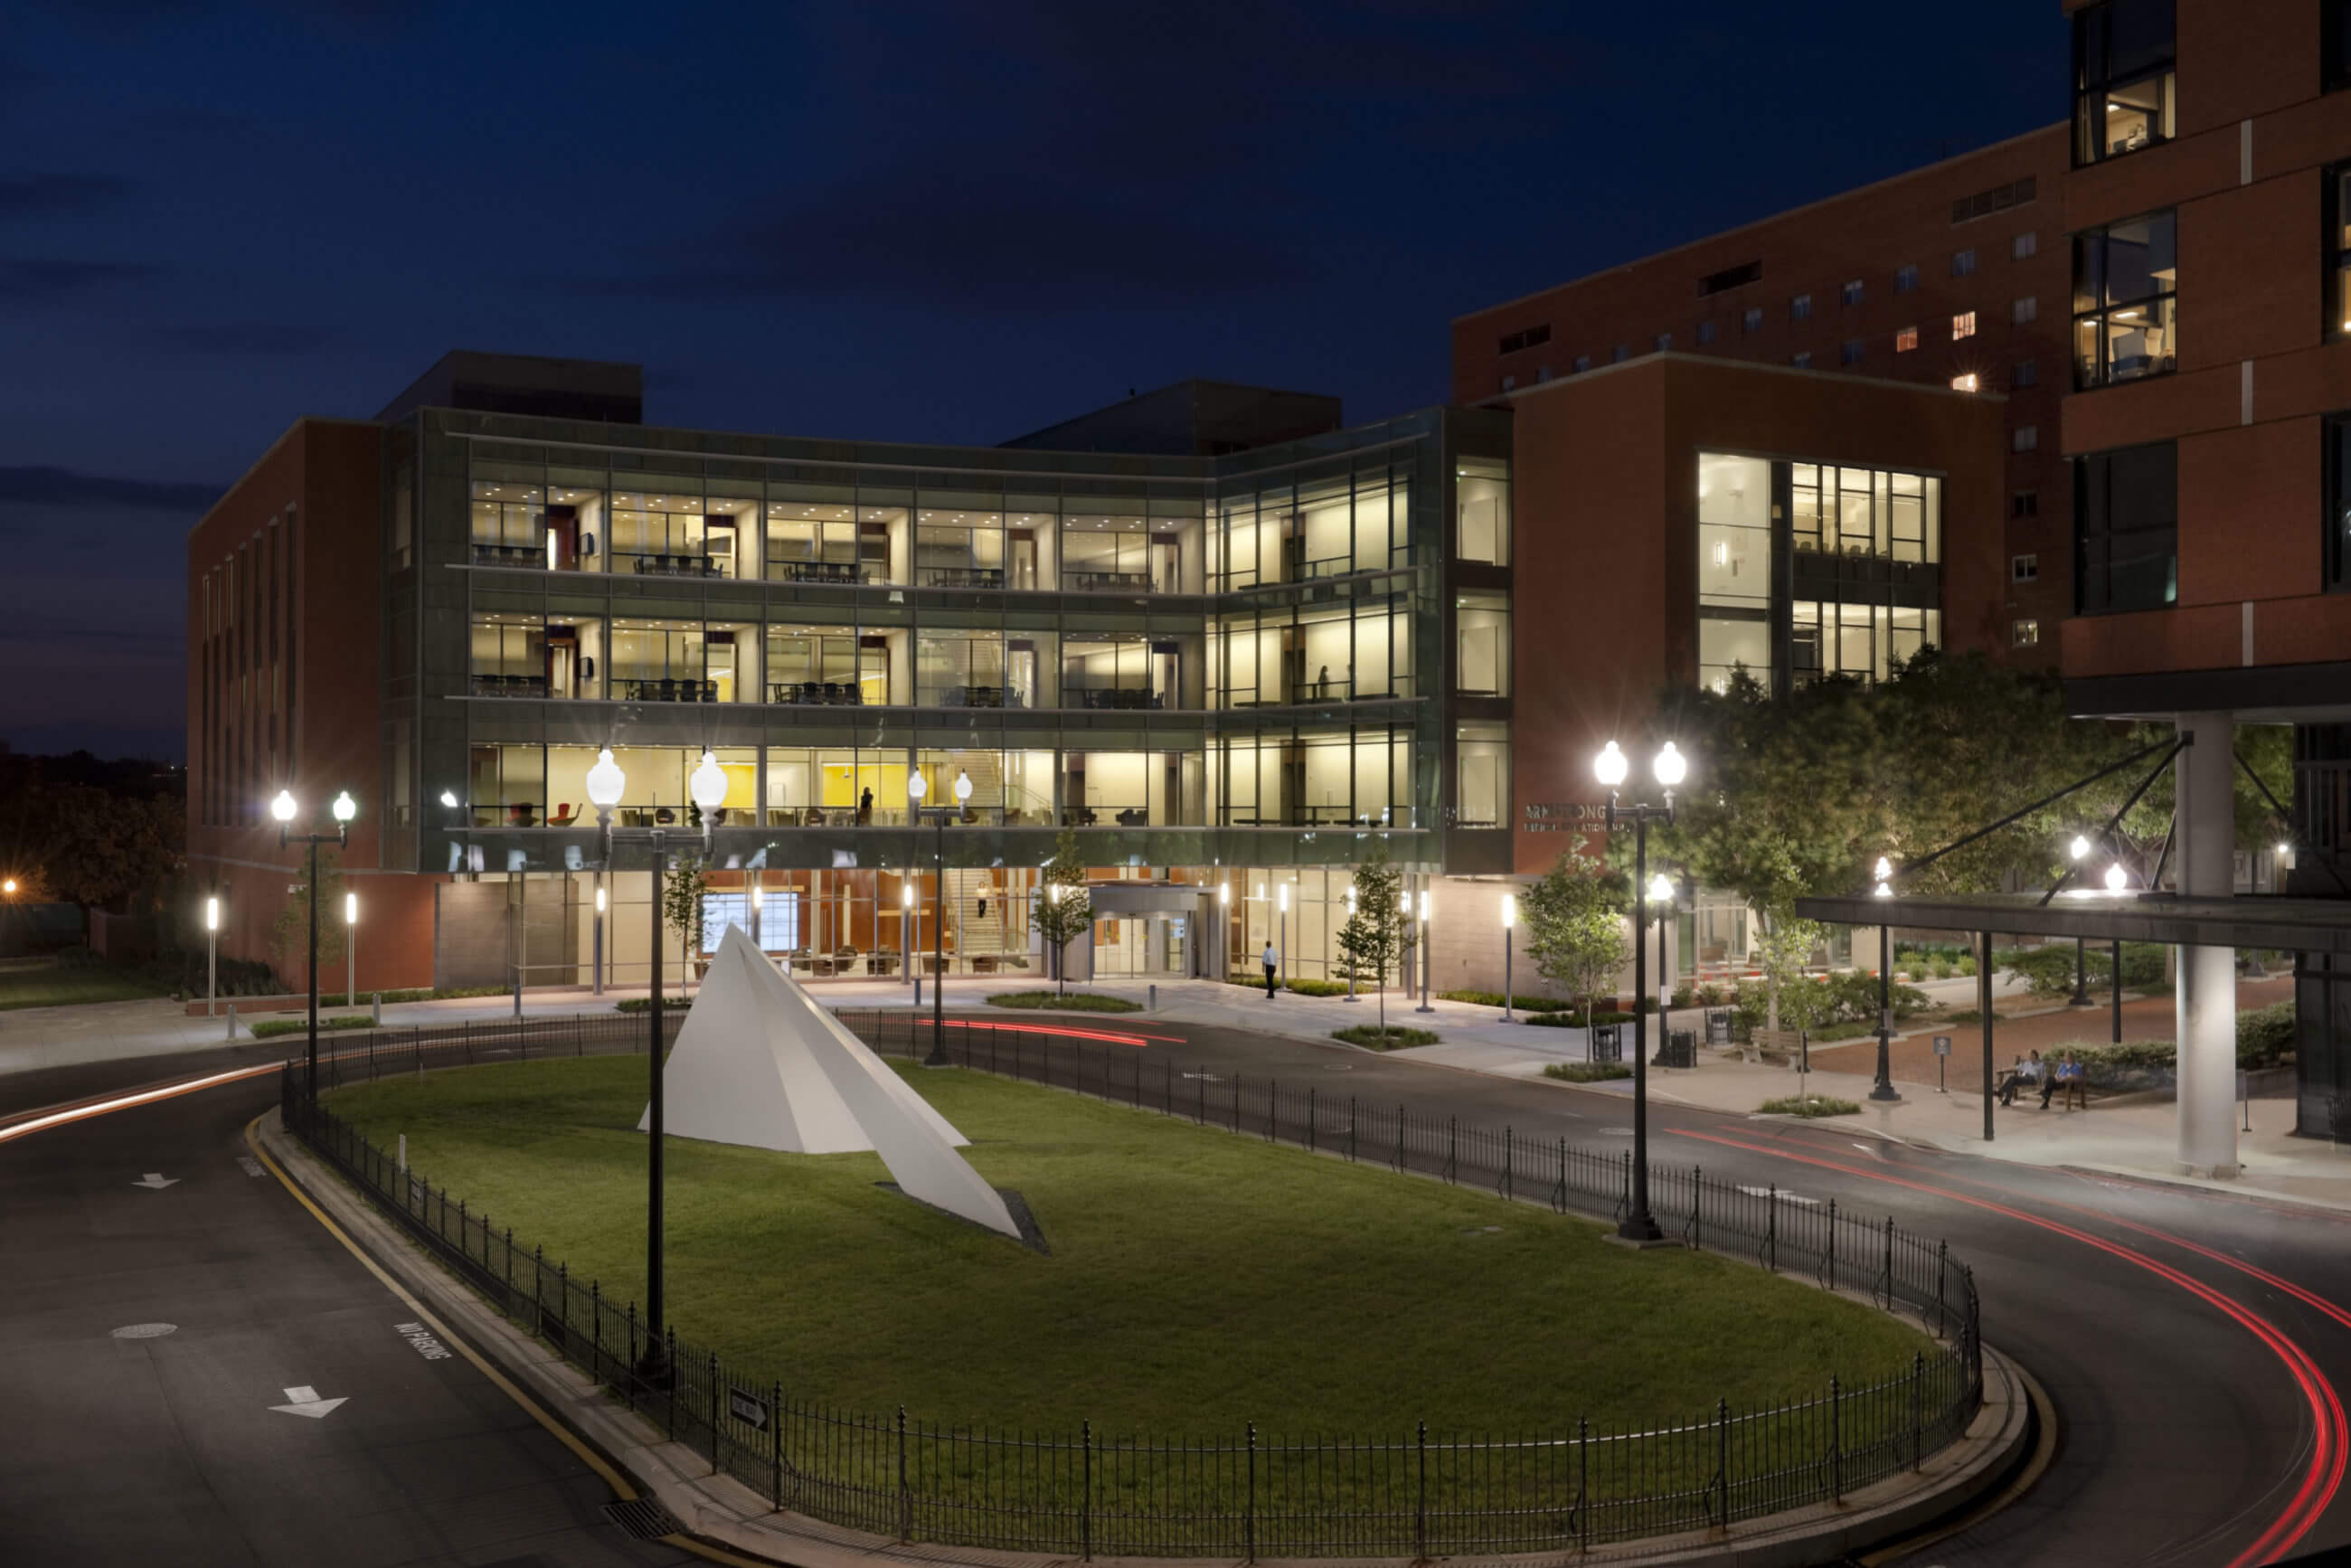 Anne & Michael Armstrong Medical Education Building at Johns Hopkins University Night Exterior